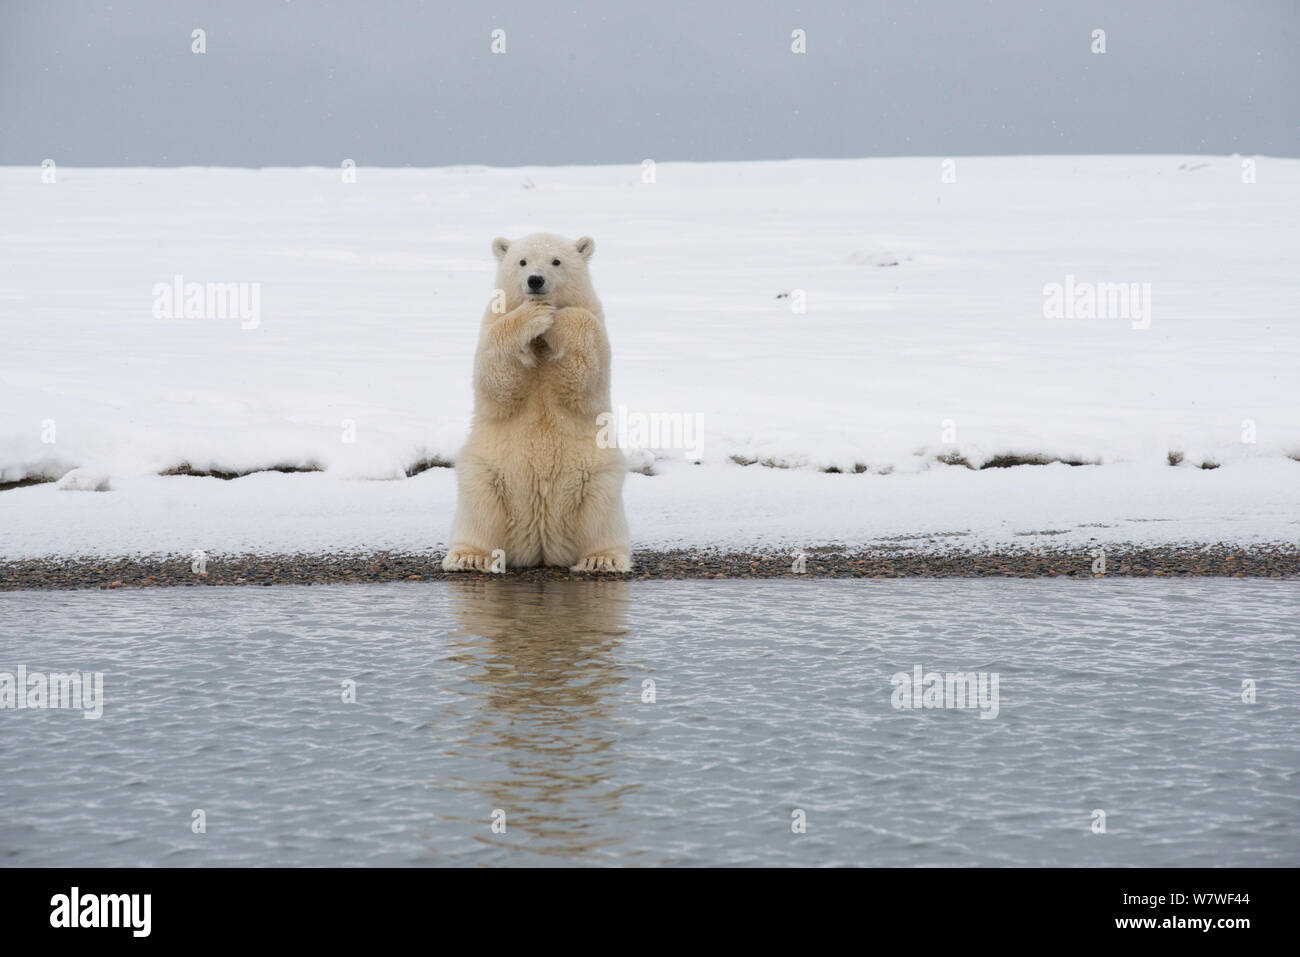 Polar bear (Ursus maritimus) spring cub sitting up on its haunches and scratches itself, on a barrier island during autumn freeze up, Bernard Spit, North Slope, Alaska, September Stock Photo